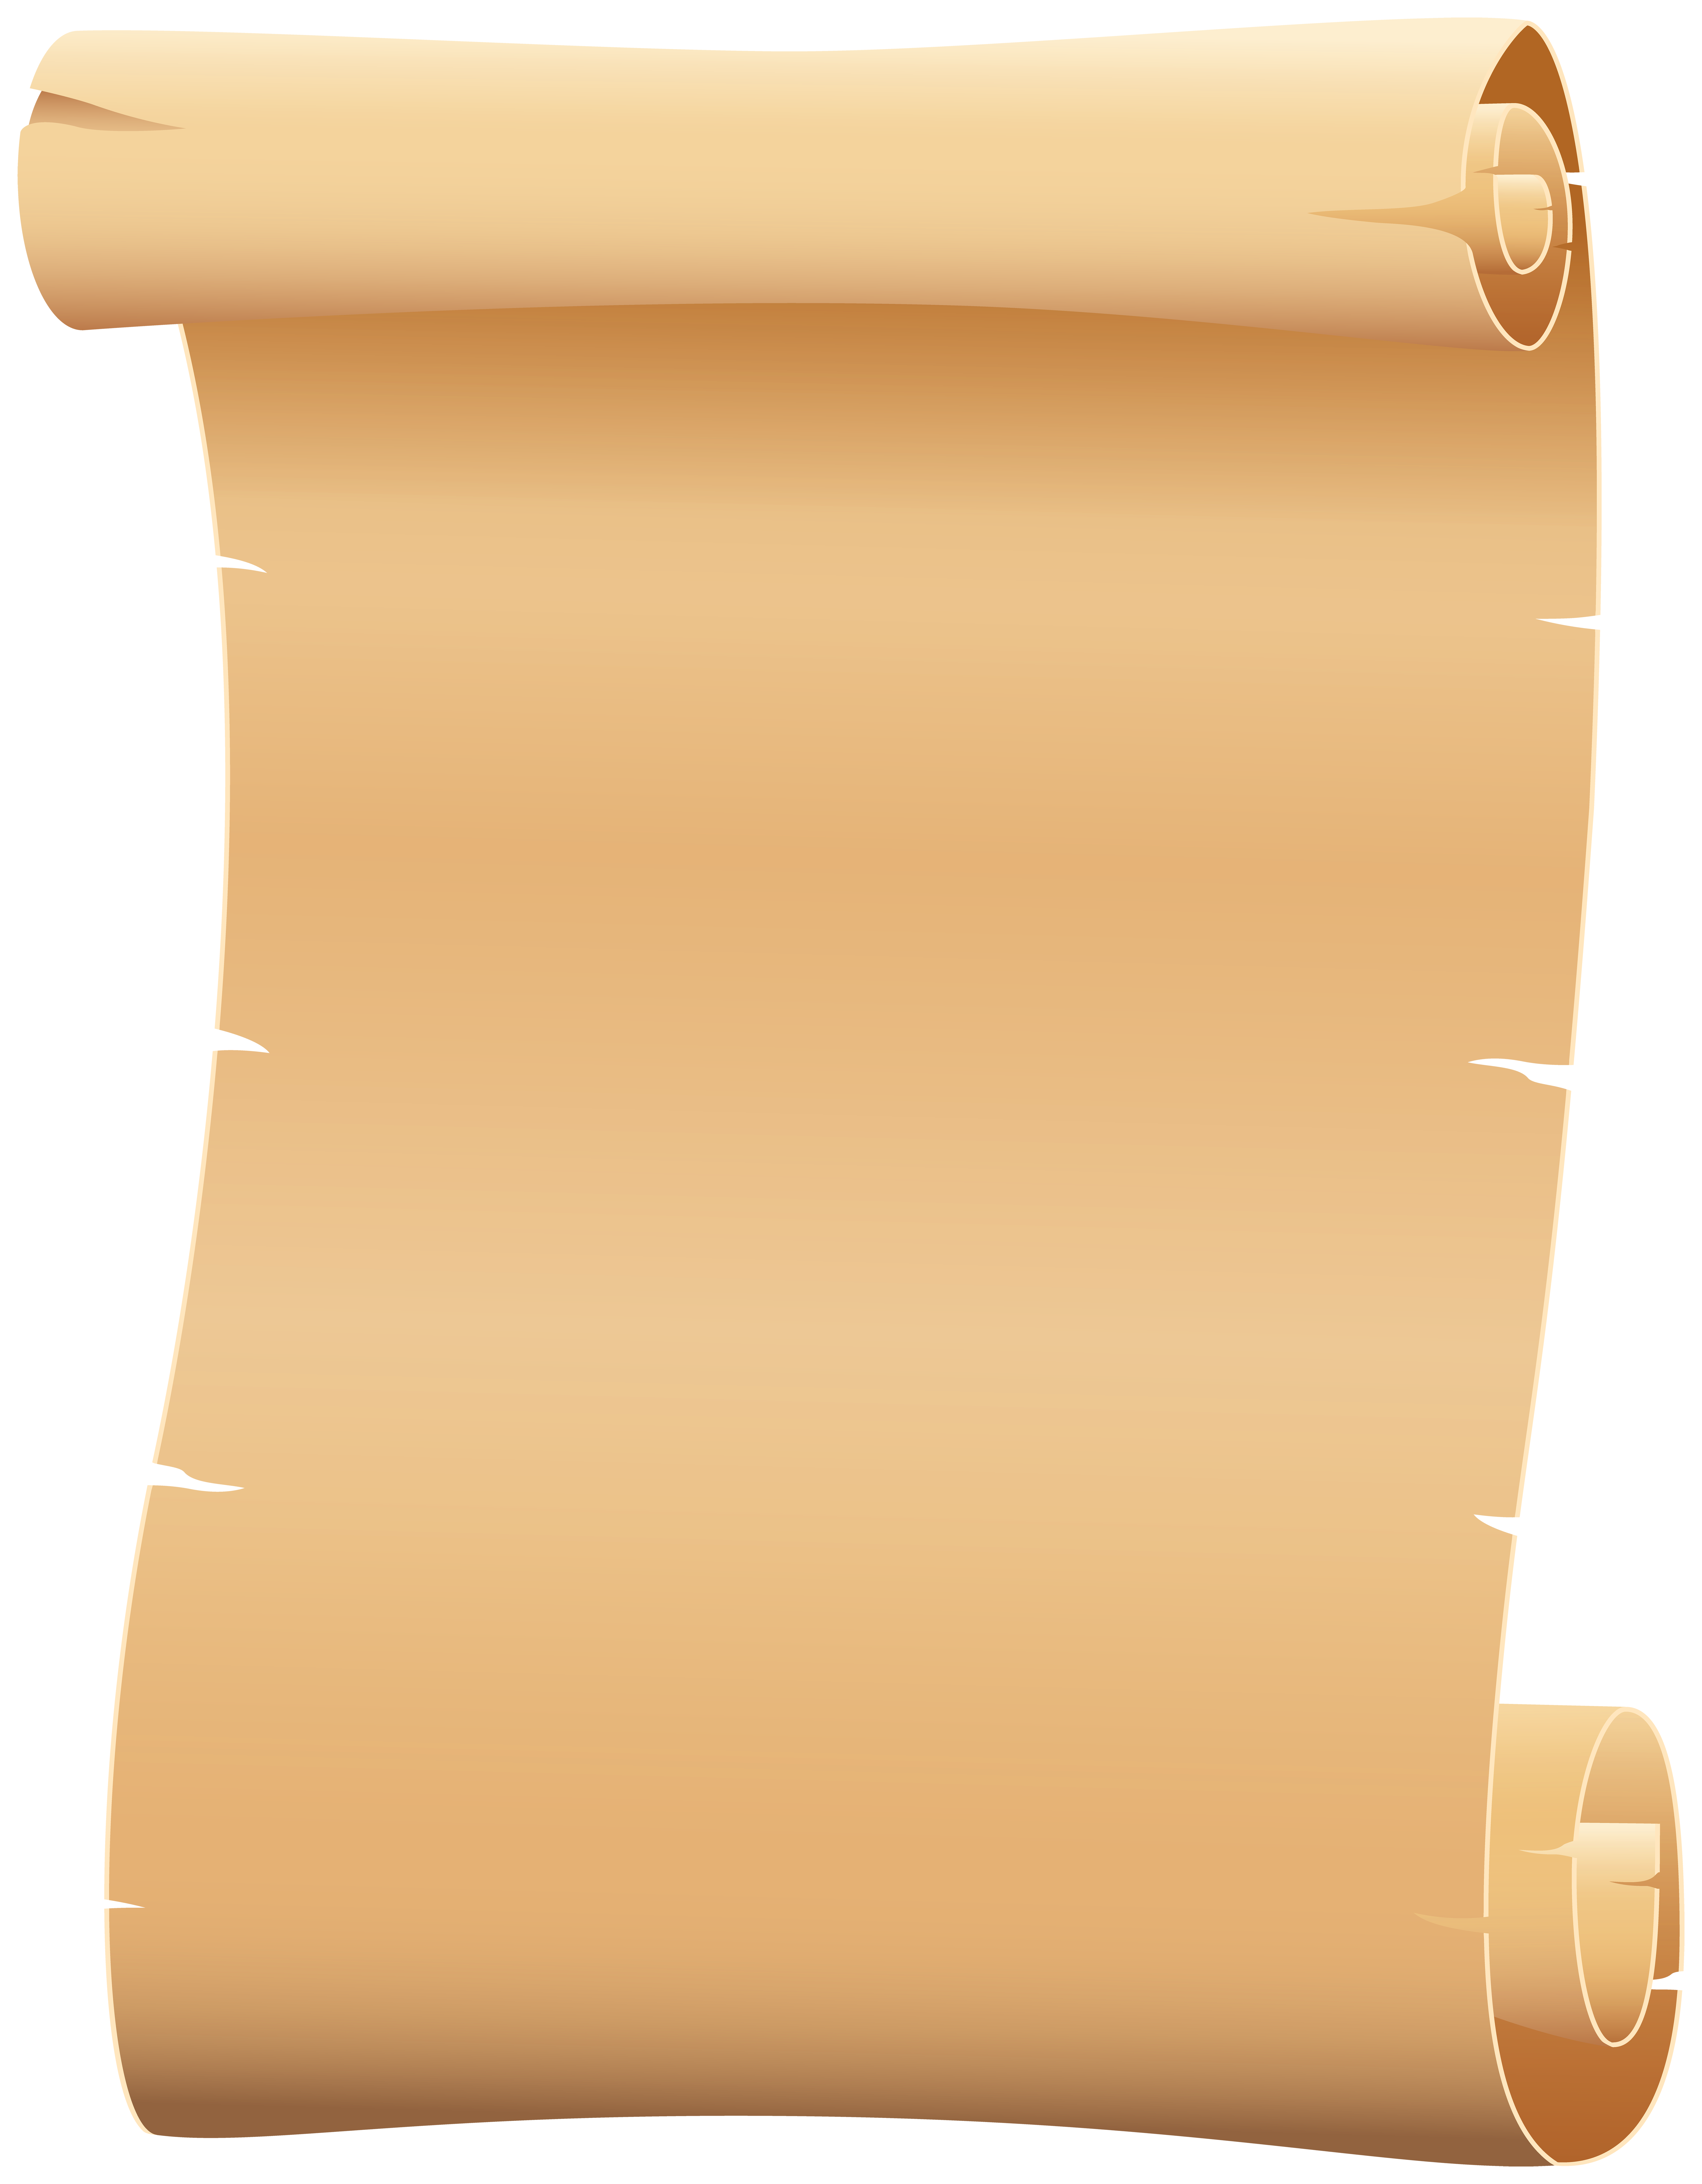 Paper scroll clipart. Free download transparent .PNG